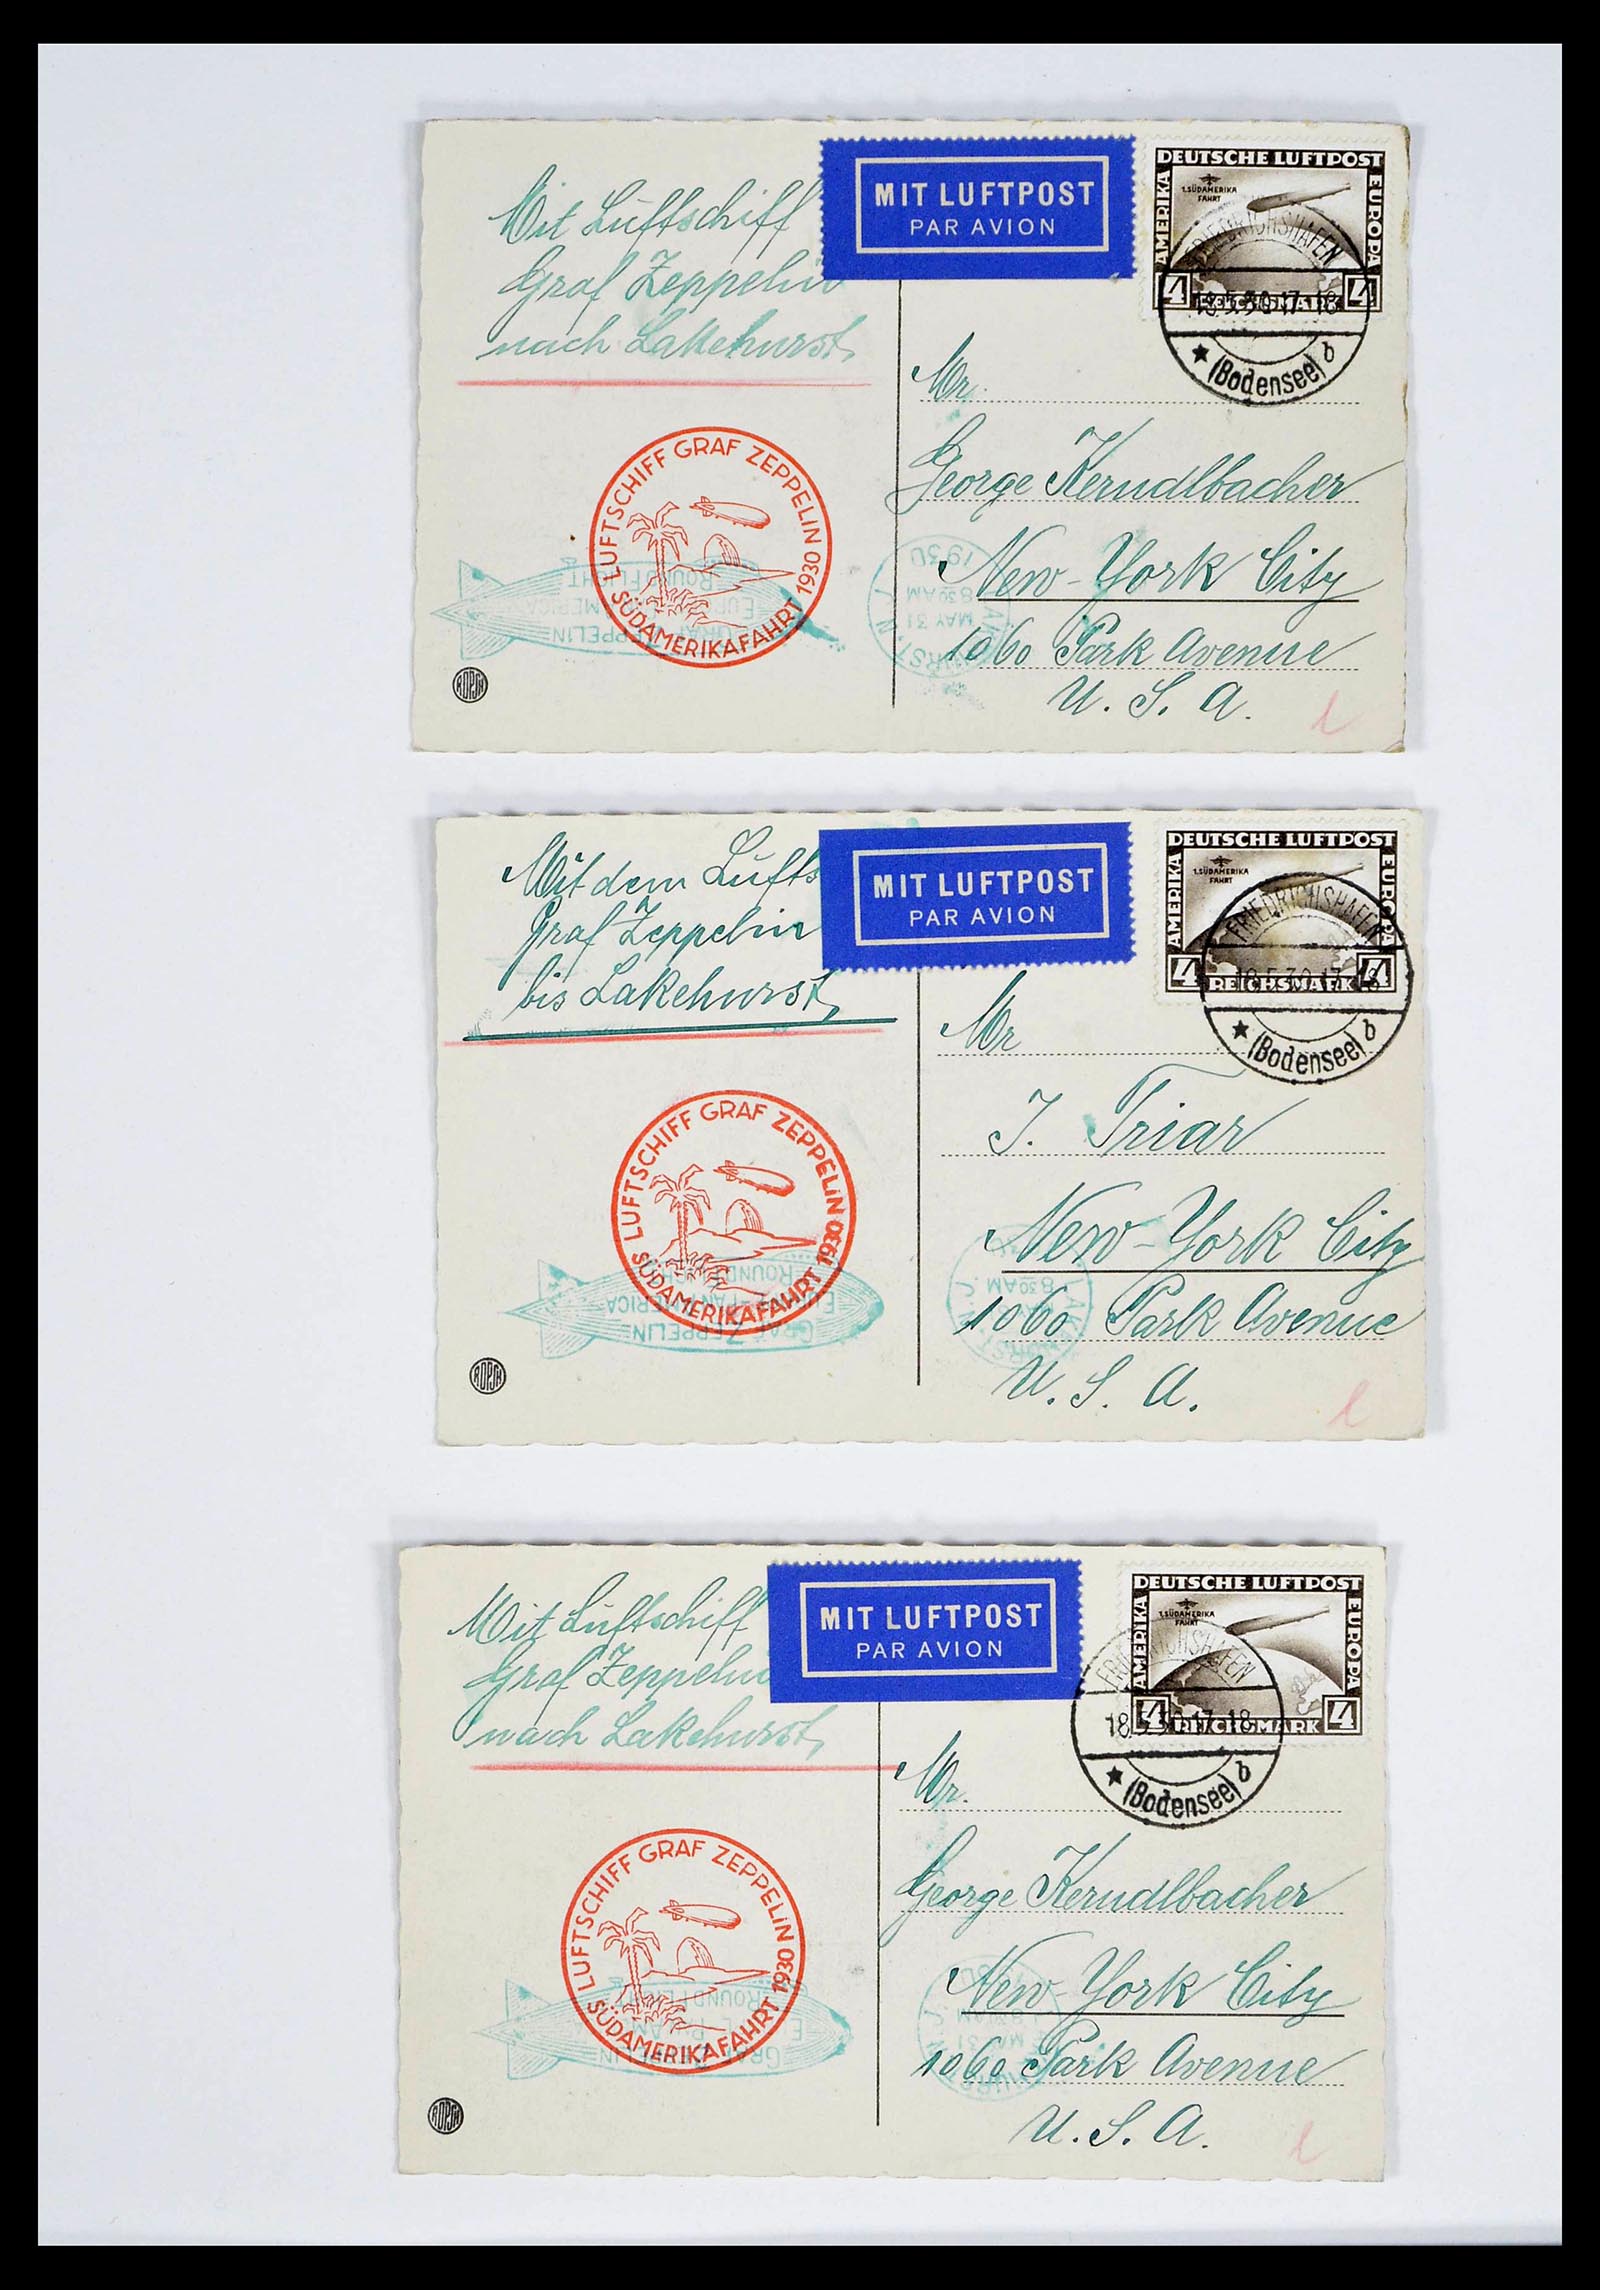 39032 0024 - Stamp collection 39032 Zeppelin covers 1928-1933.